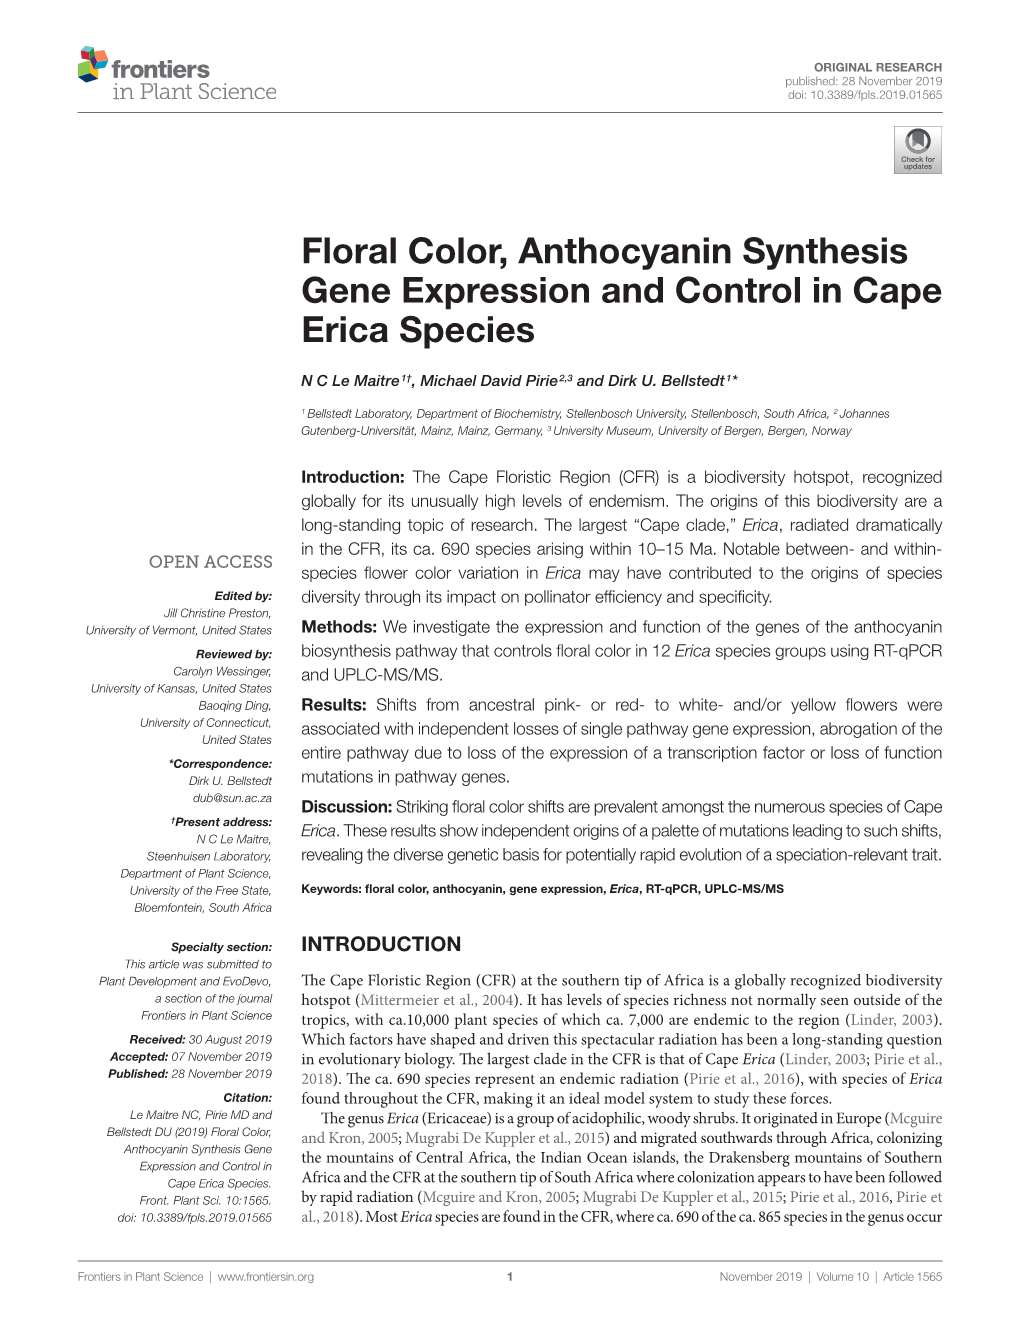 Floral Color, Anthocyanin Synthesis Gene Expression and Control in Cape Erica Species